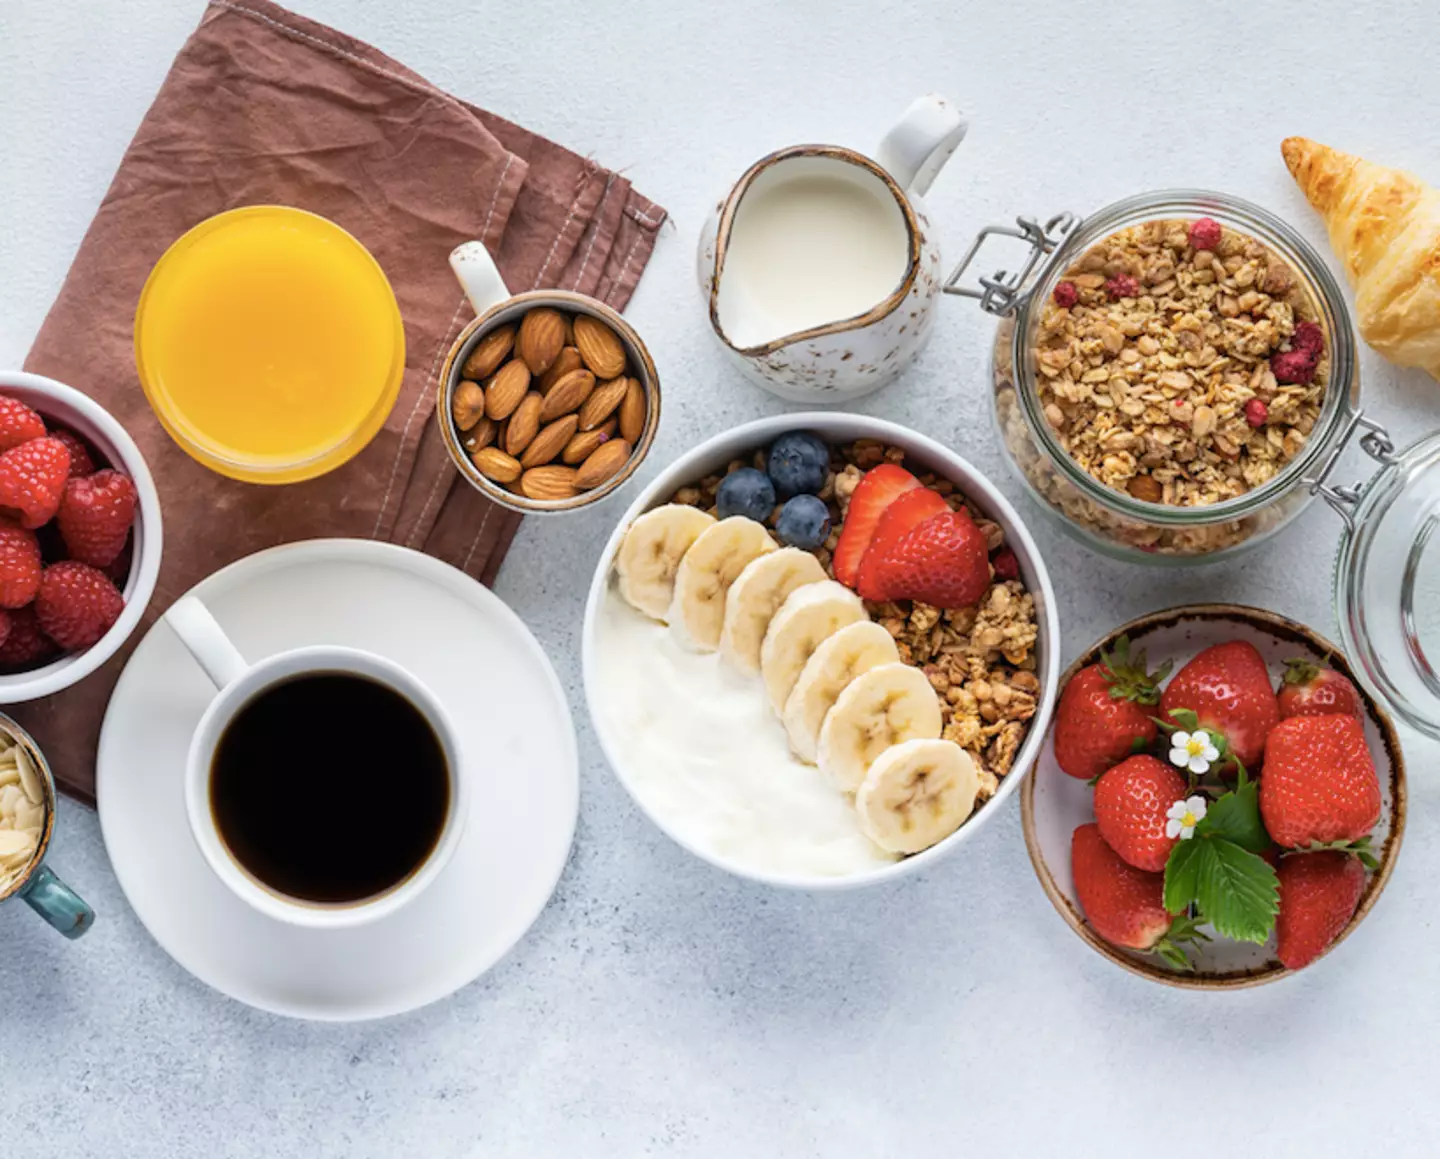 Your breakfast is often the most acidic meal you eat (